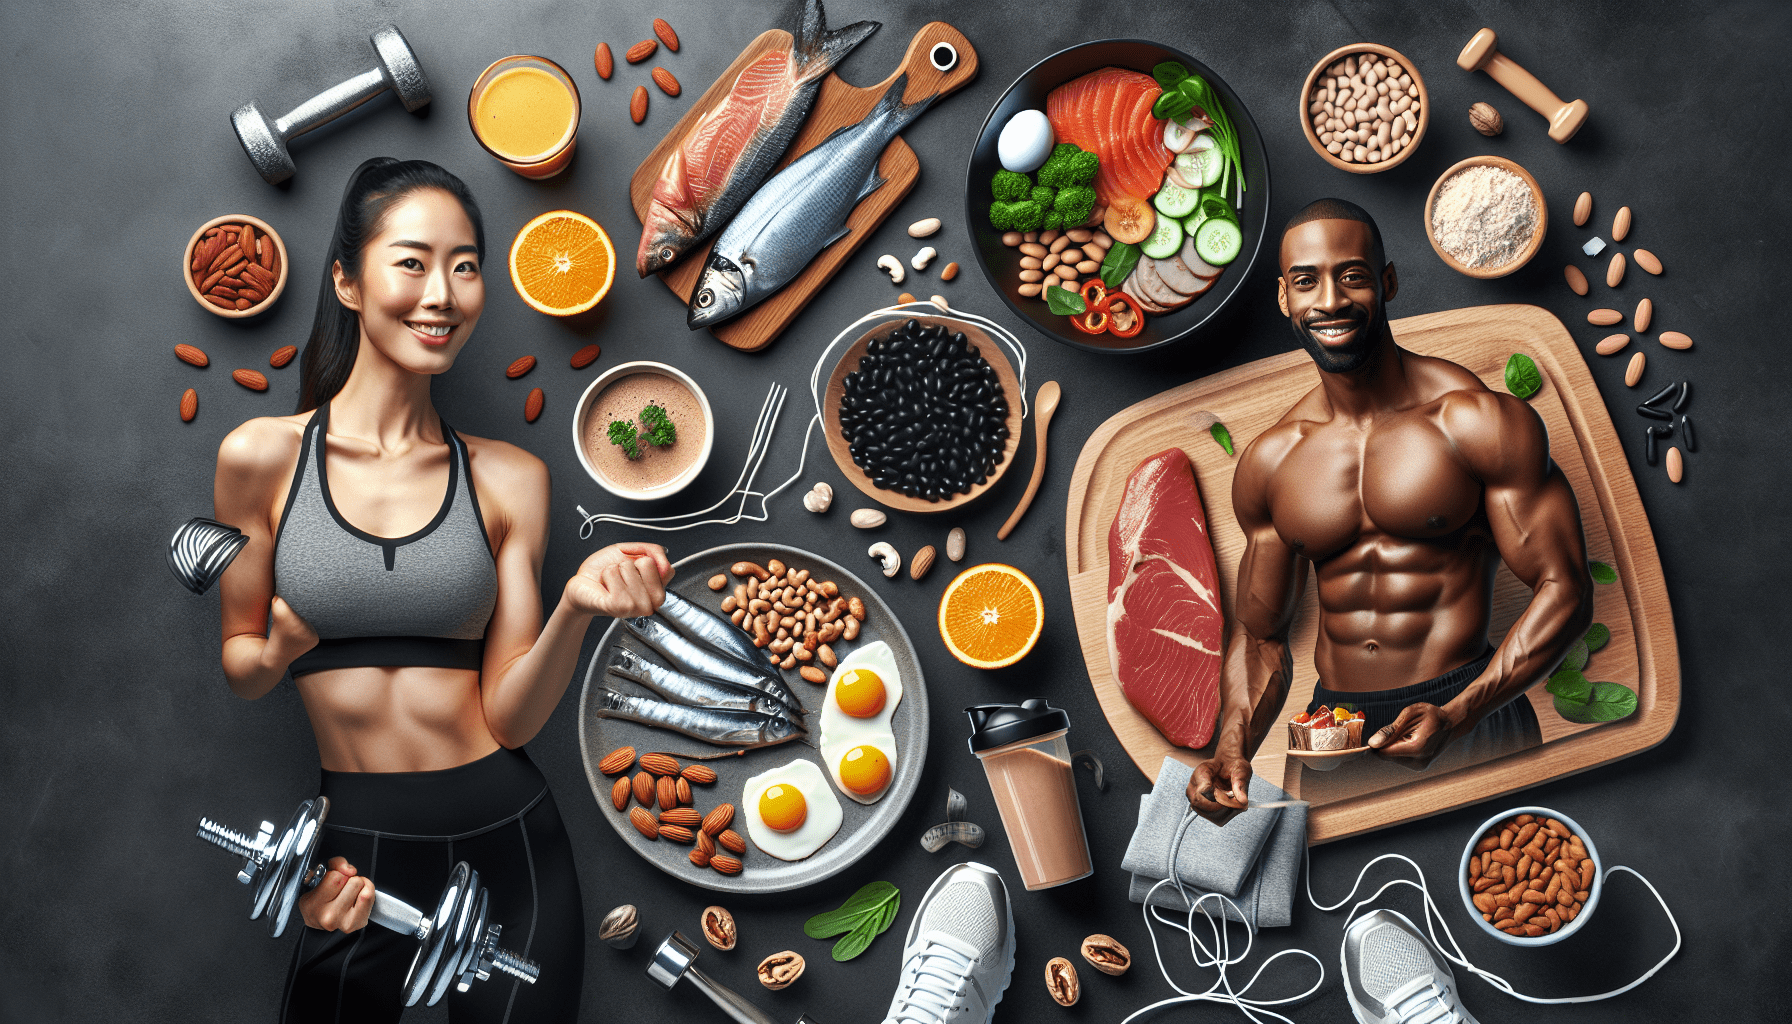 The Power Of Protein: How To Eat Tasty And Stay Trim